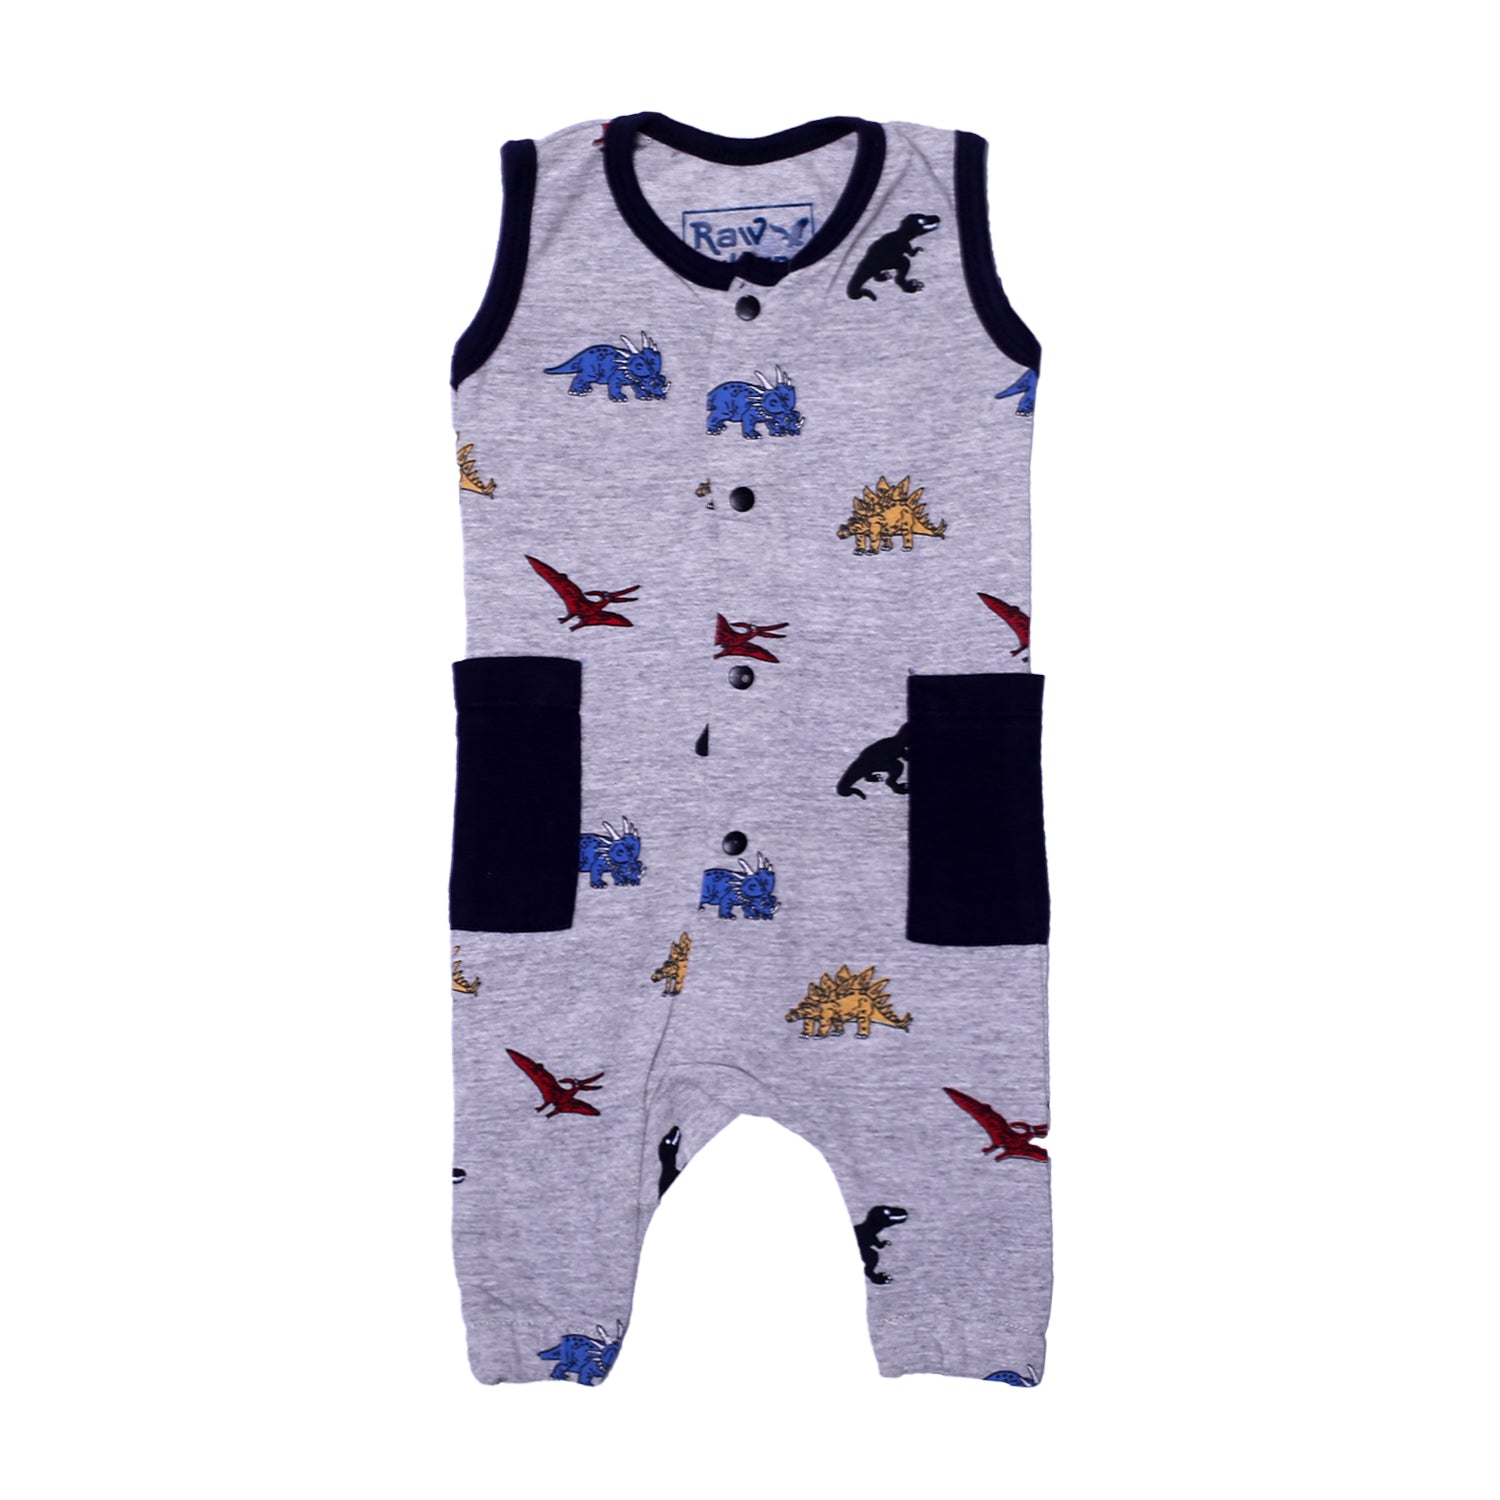 LIGHT GREY FULL BODY SLEEVE LESS DINO WITH NAVY BLUE POCKETS PRINTED ROMPER